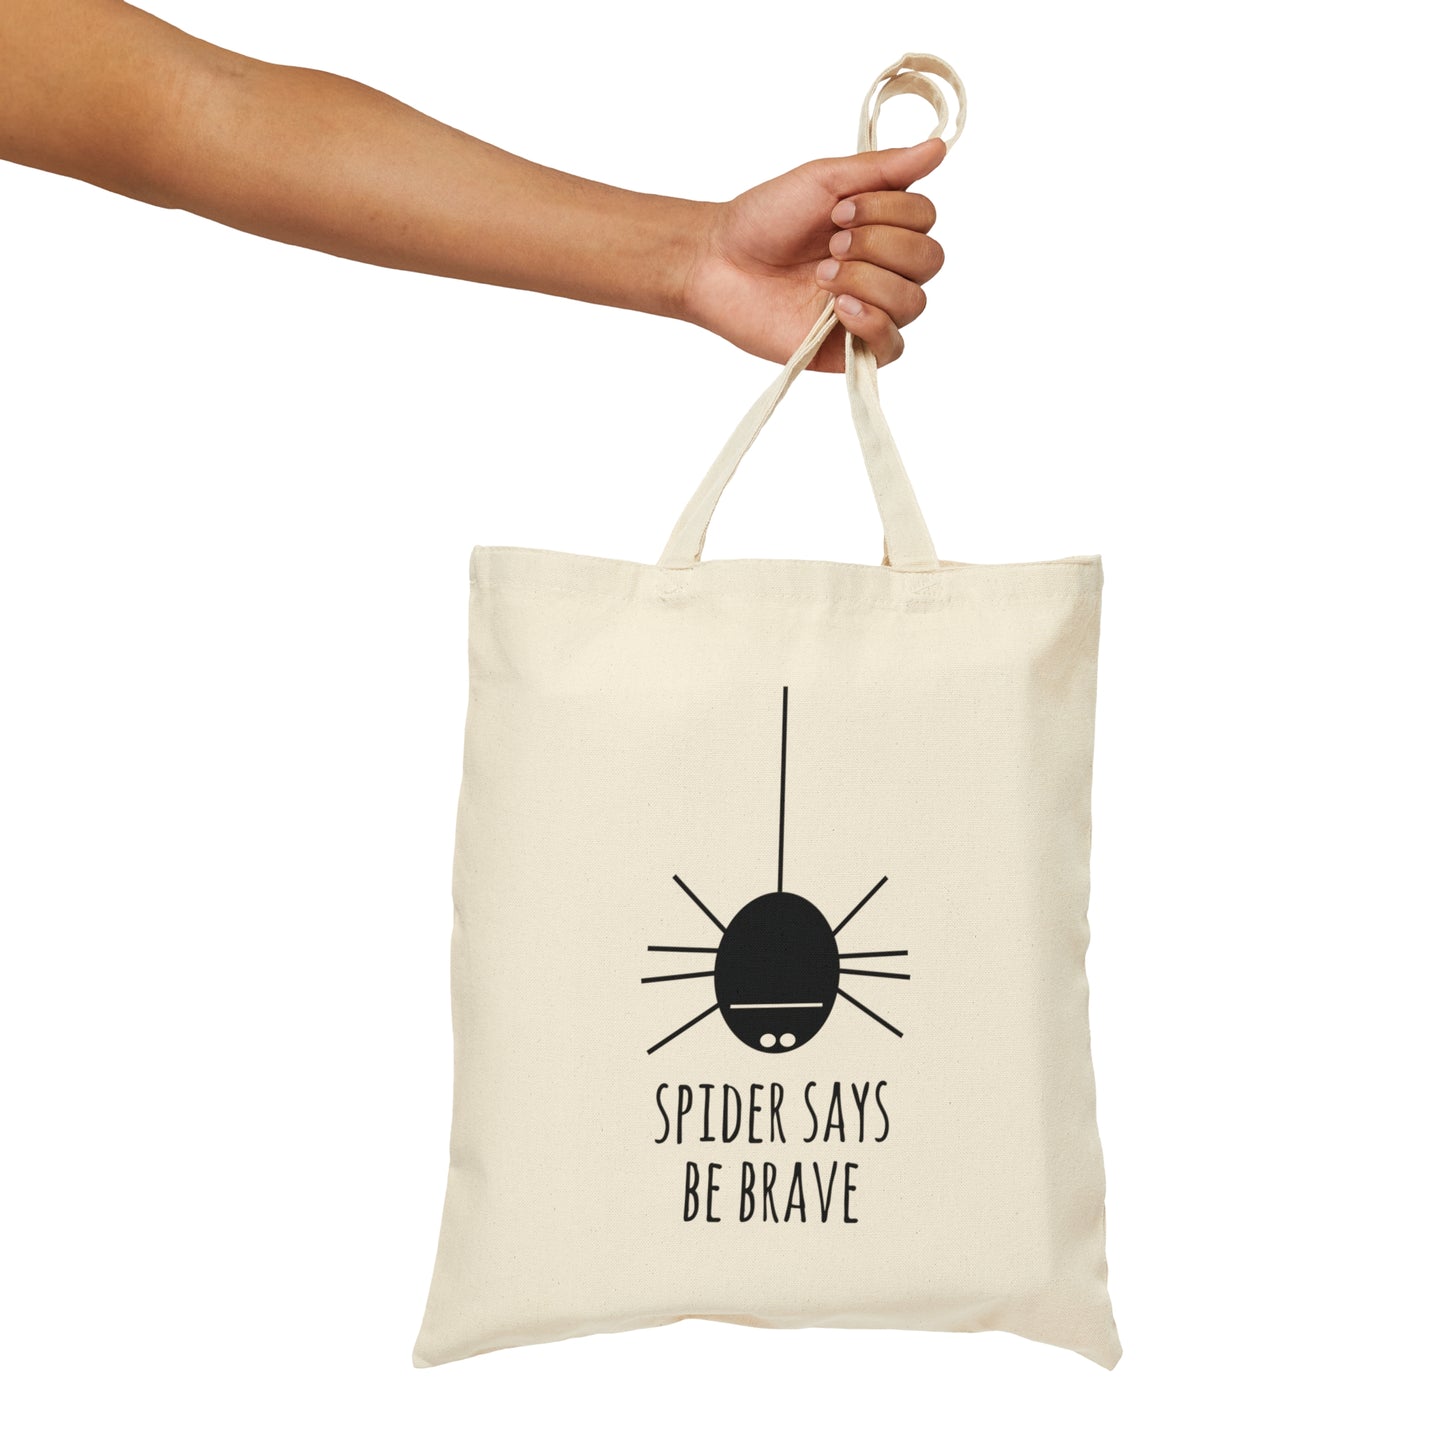 Spider Says Be Brave Canvas Shopping Cotton Tote Bag